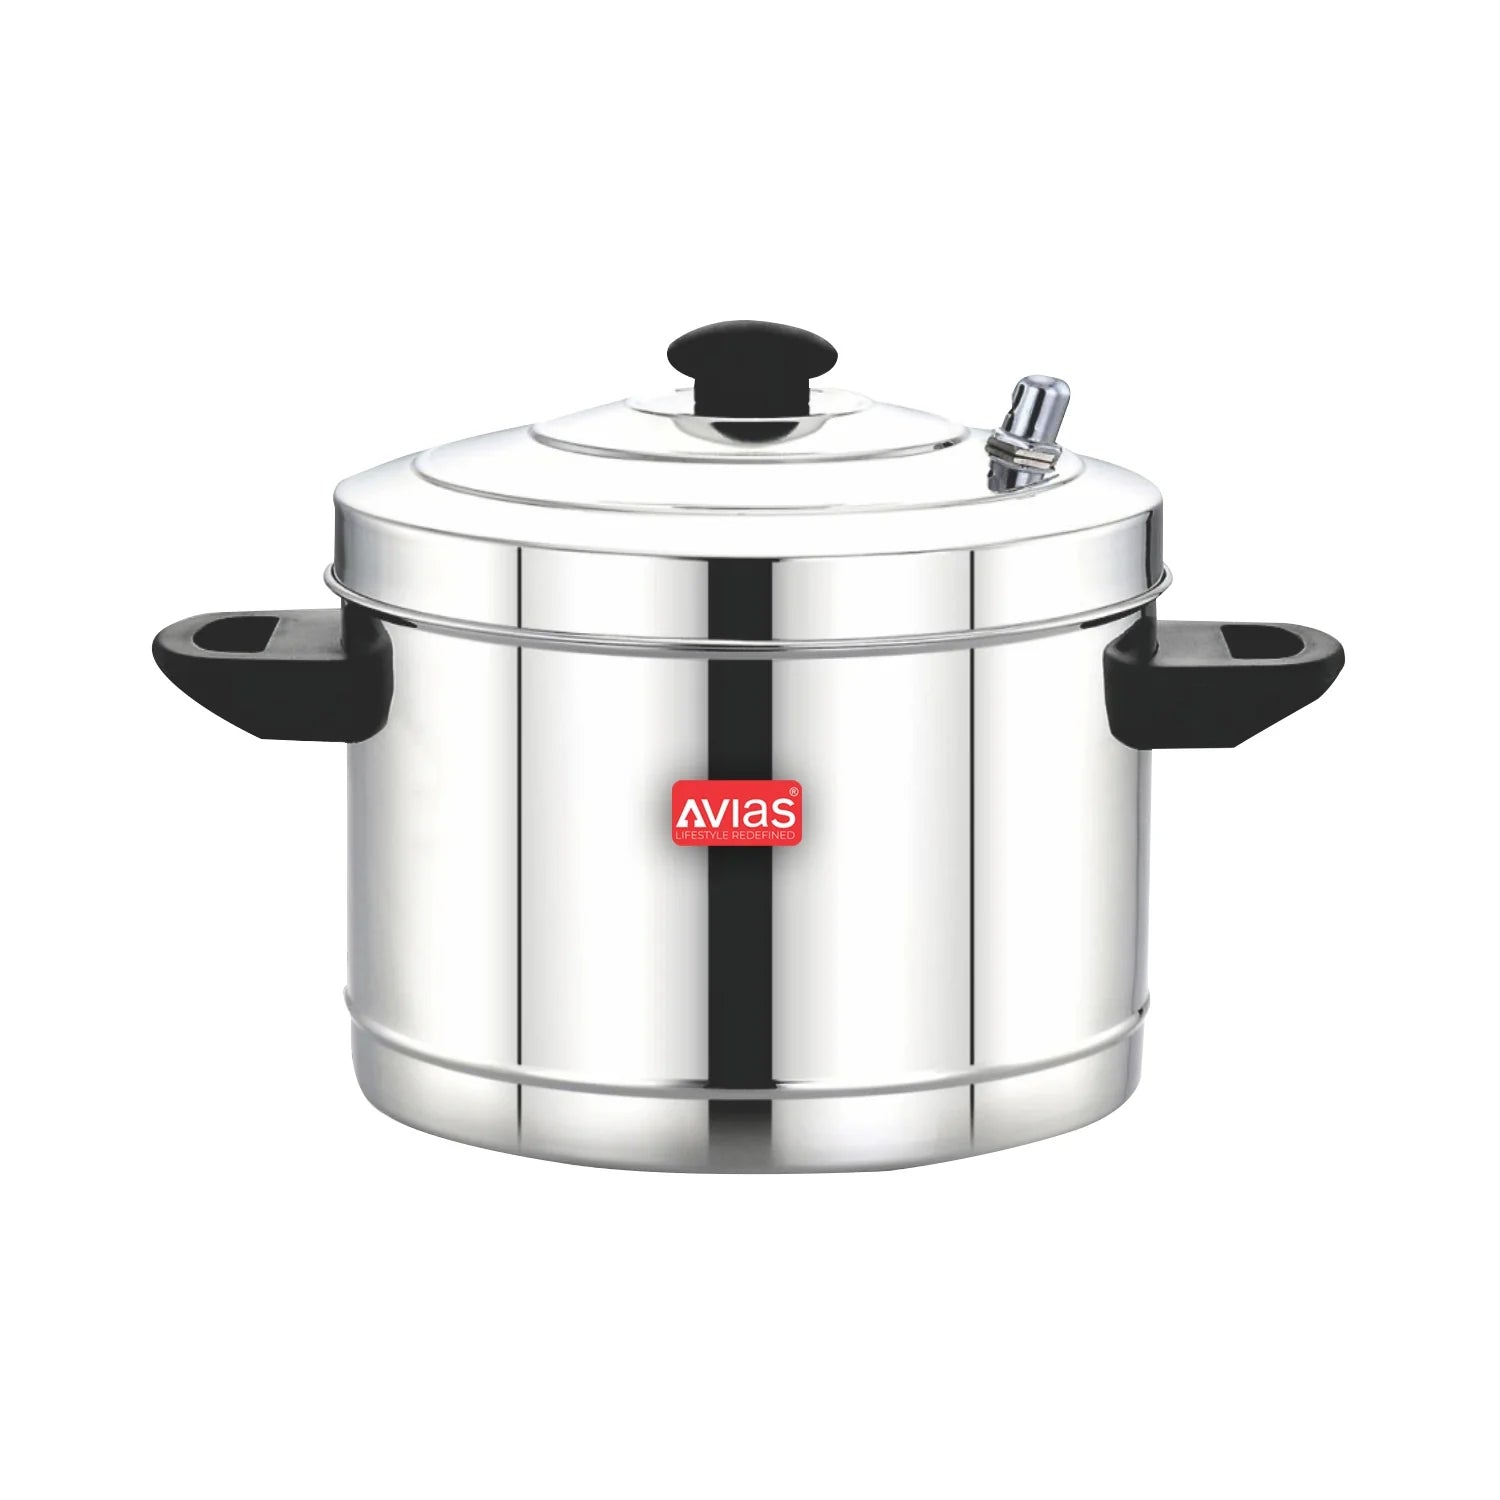 AVIAS stainless steel Idly cooker/ idly maker/ idly pot with Bakelite handles